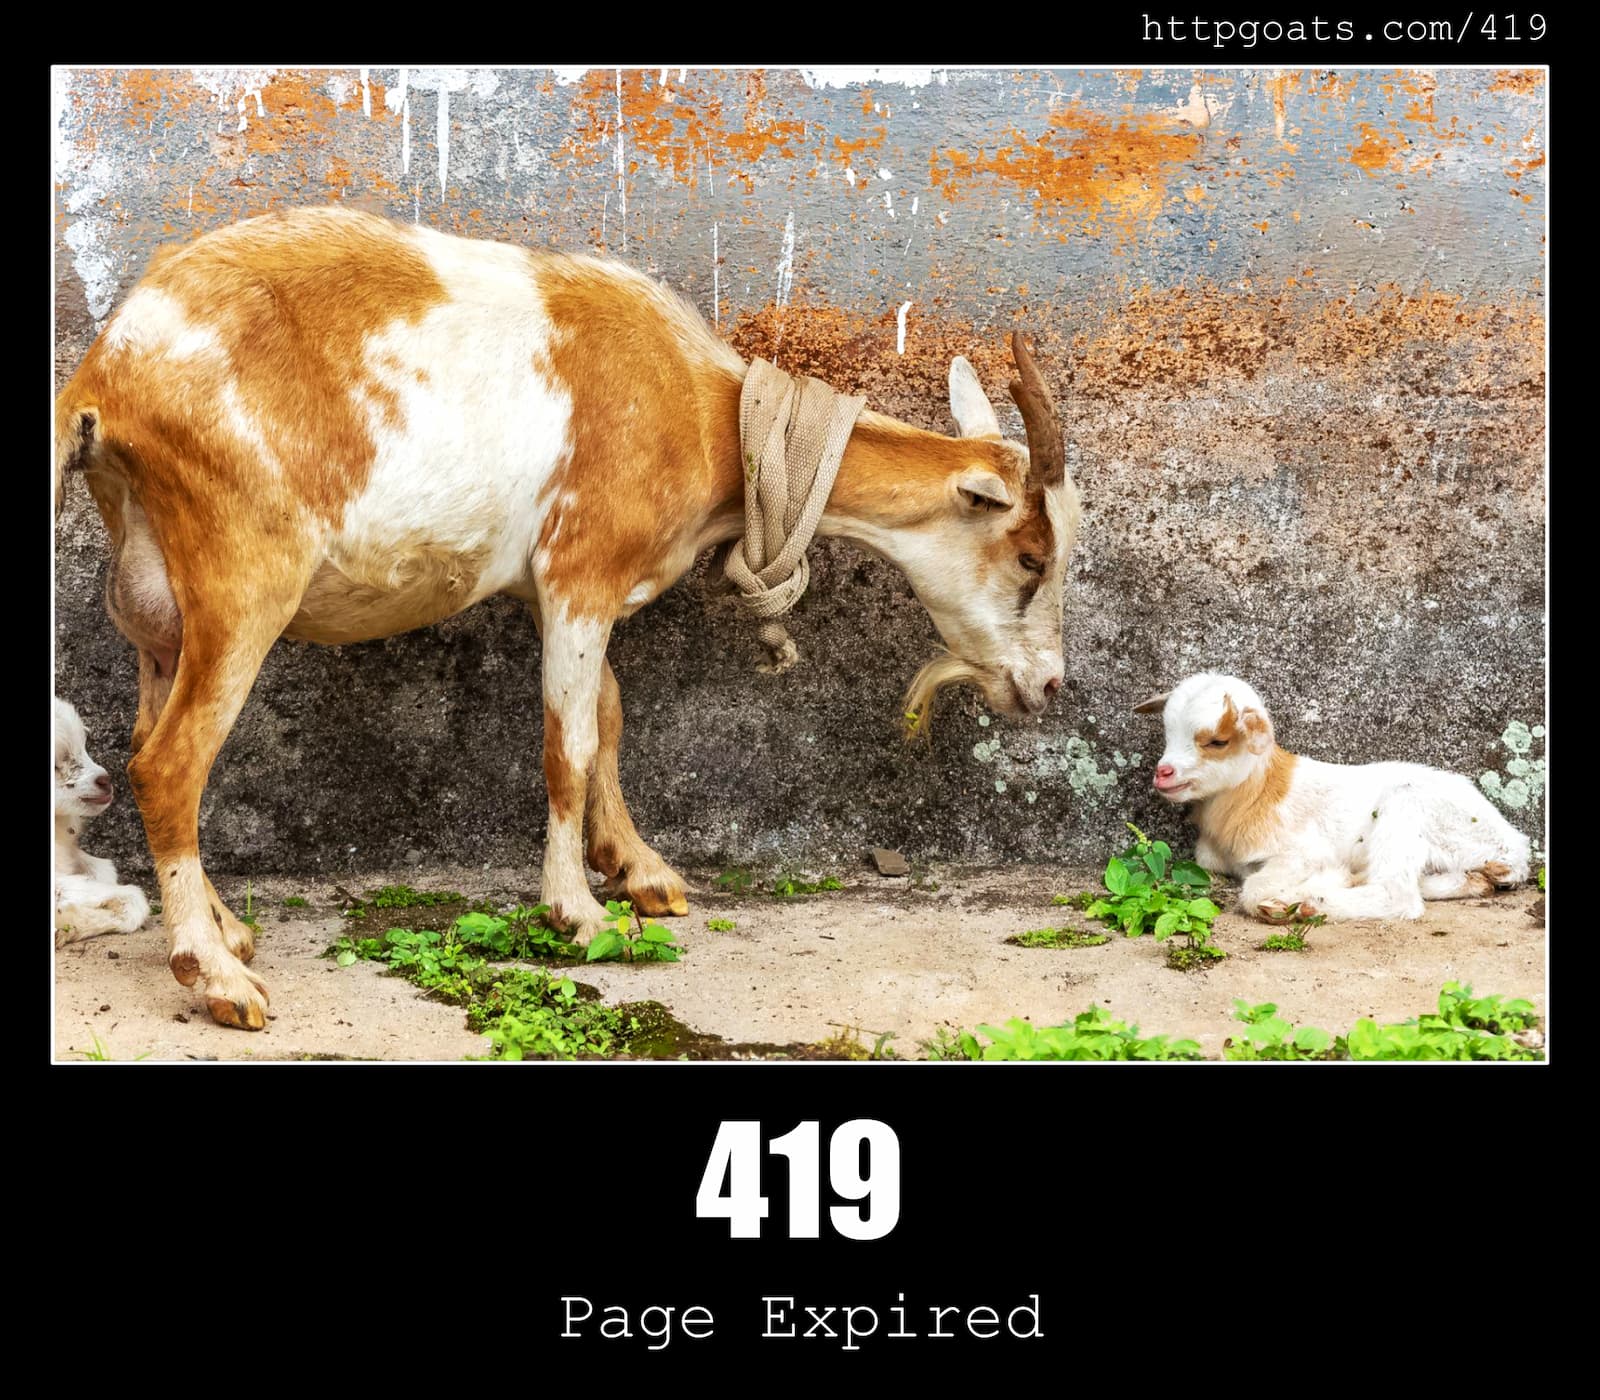 HTTP Status Code 419 Page Expired & Goats